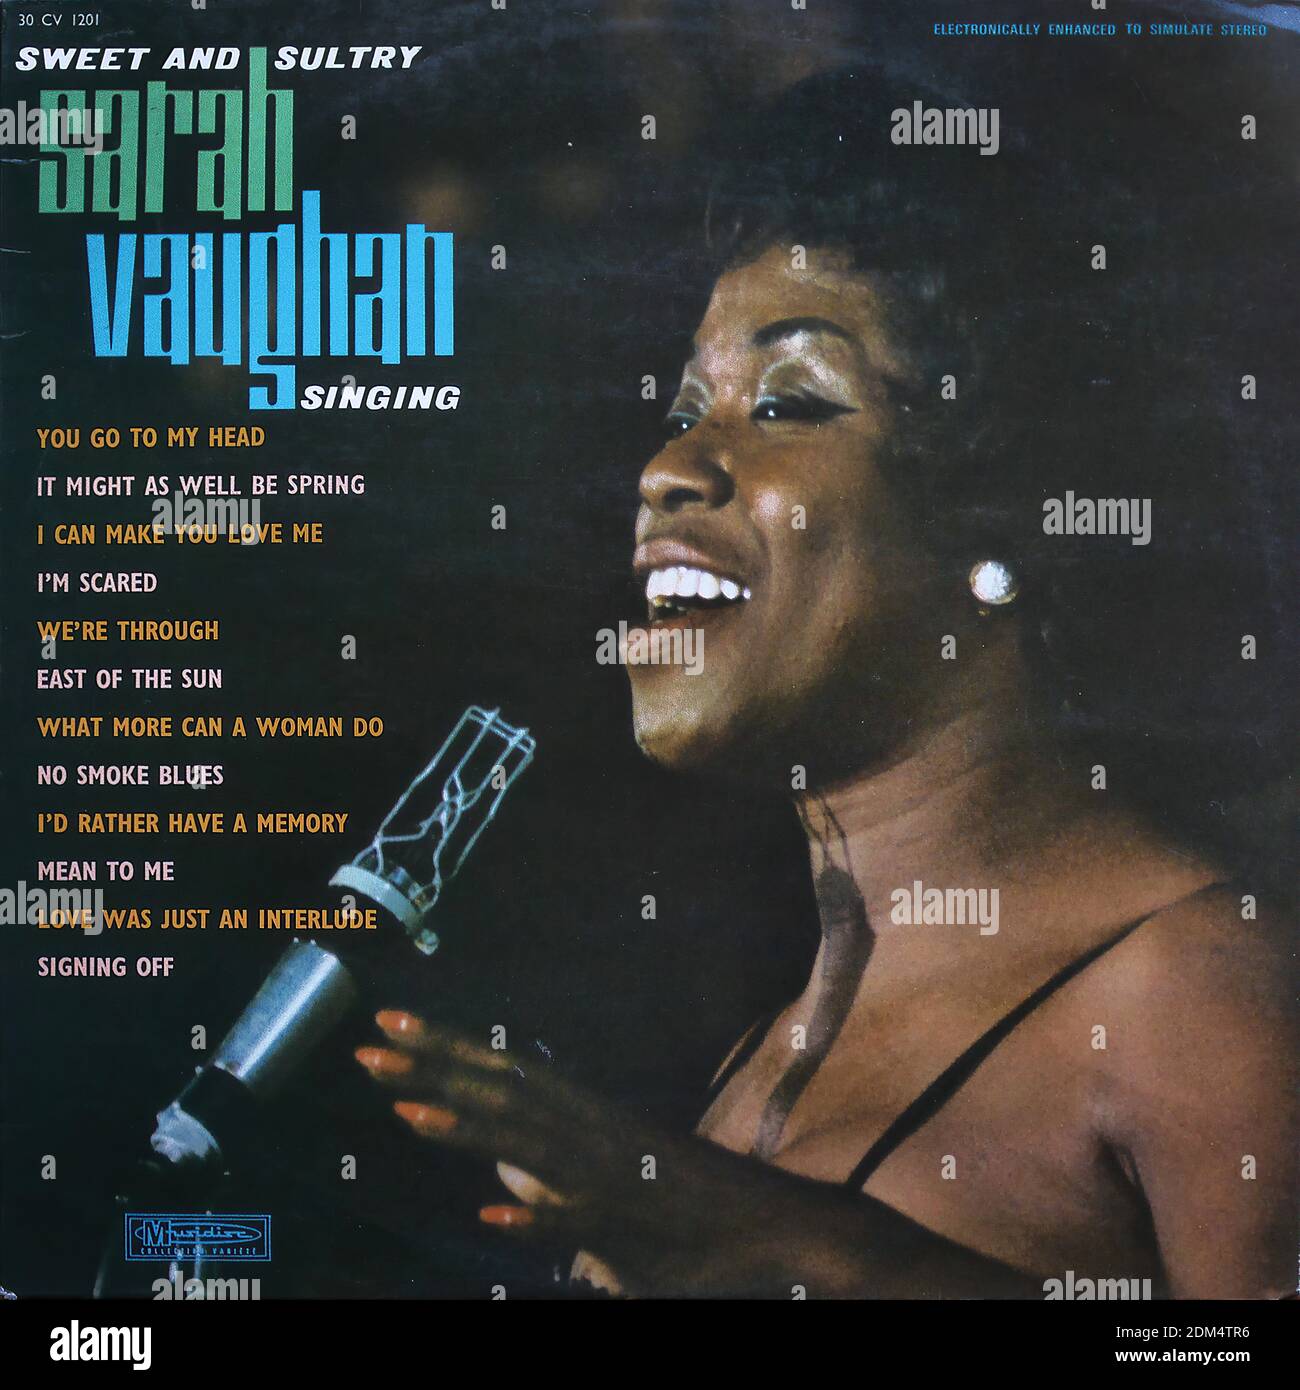 Sarah Vaughan - Sweet and Sultry, Musidisc CV 1201  - Vintage vinyl album cover Stock Photo